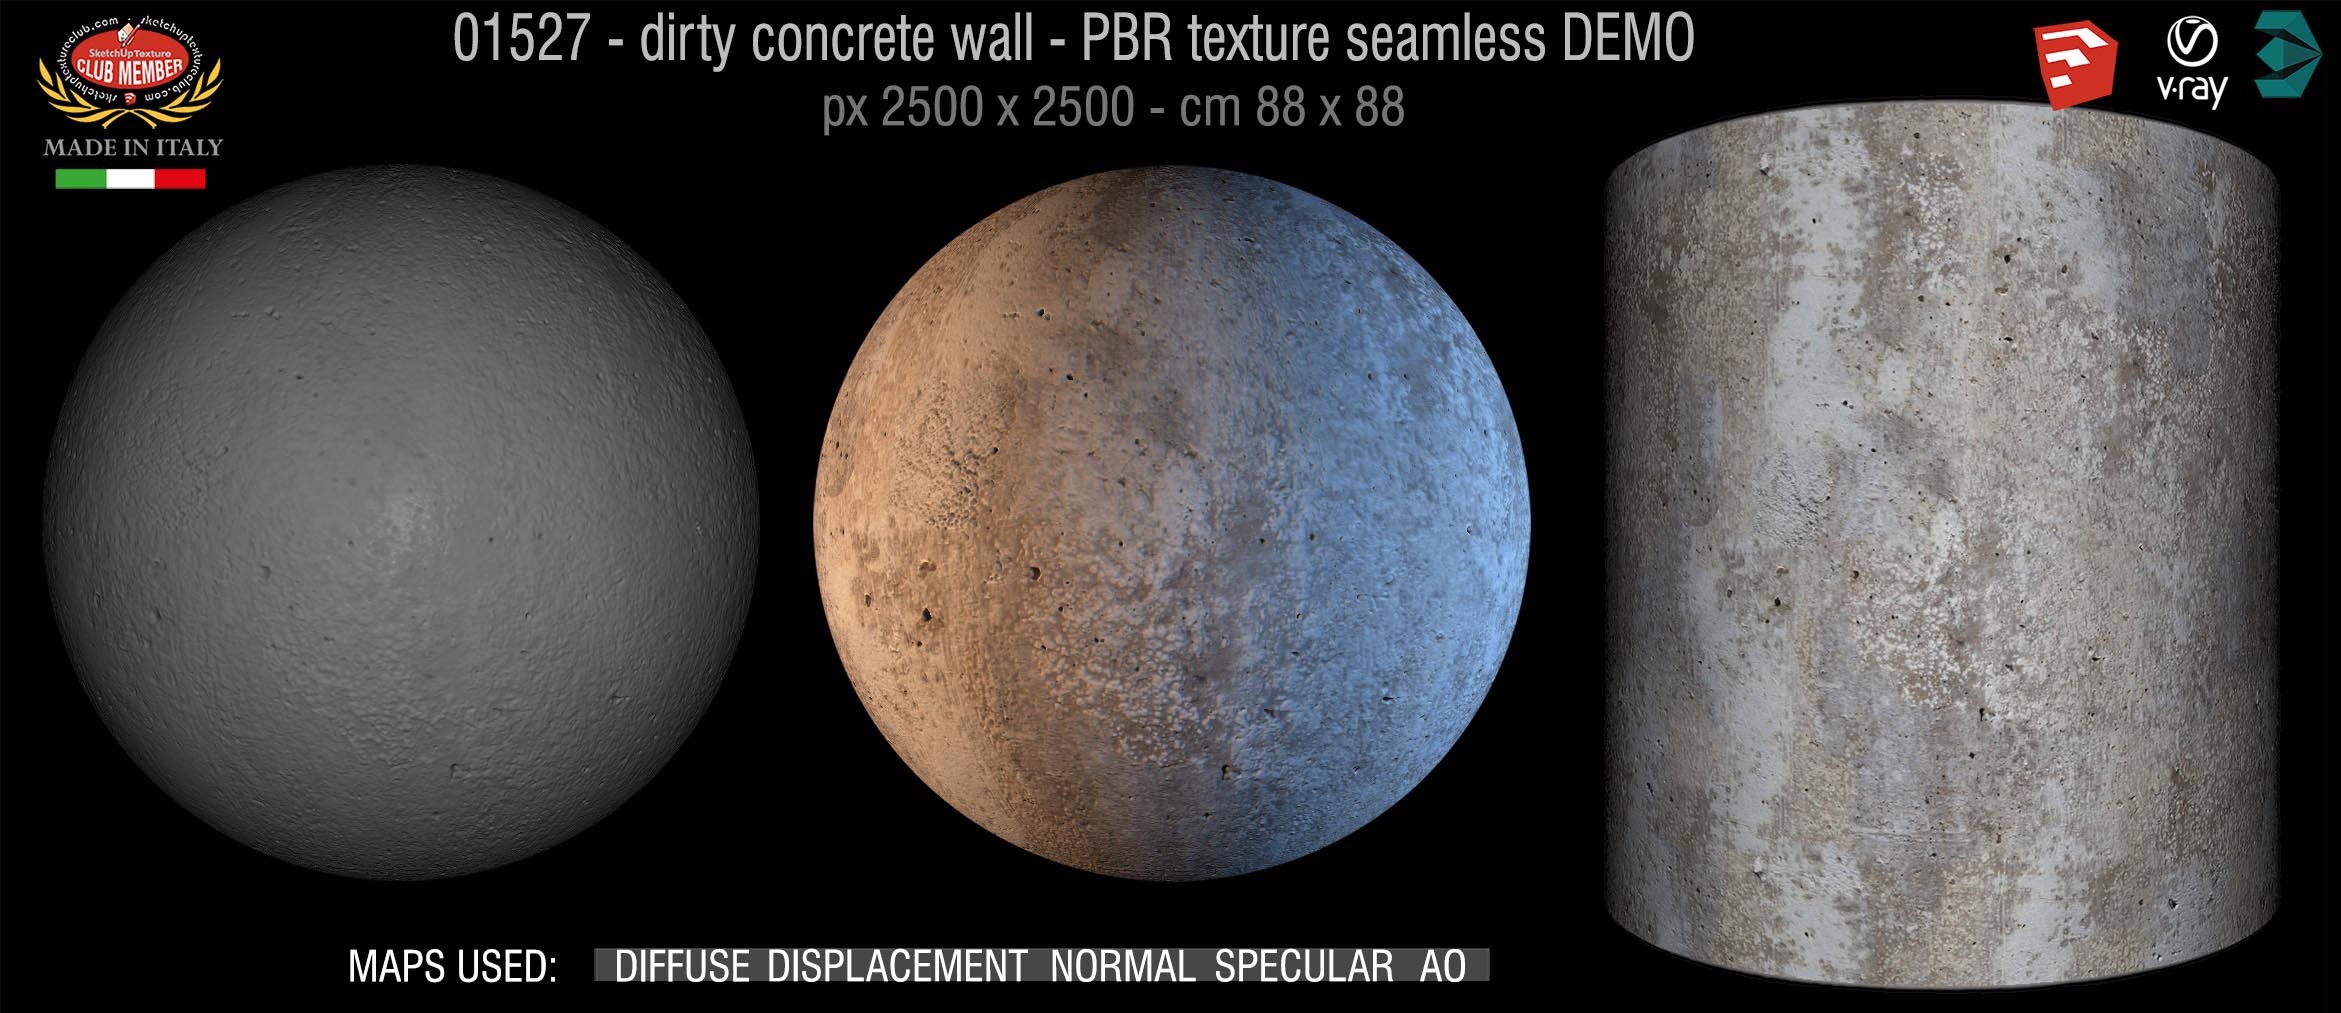 01527 Concrete bare dirty wall PBR texture seamless DEMO